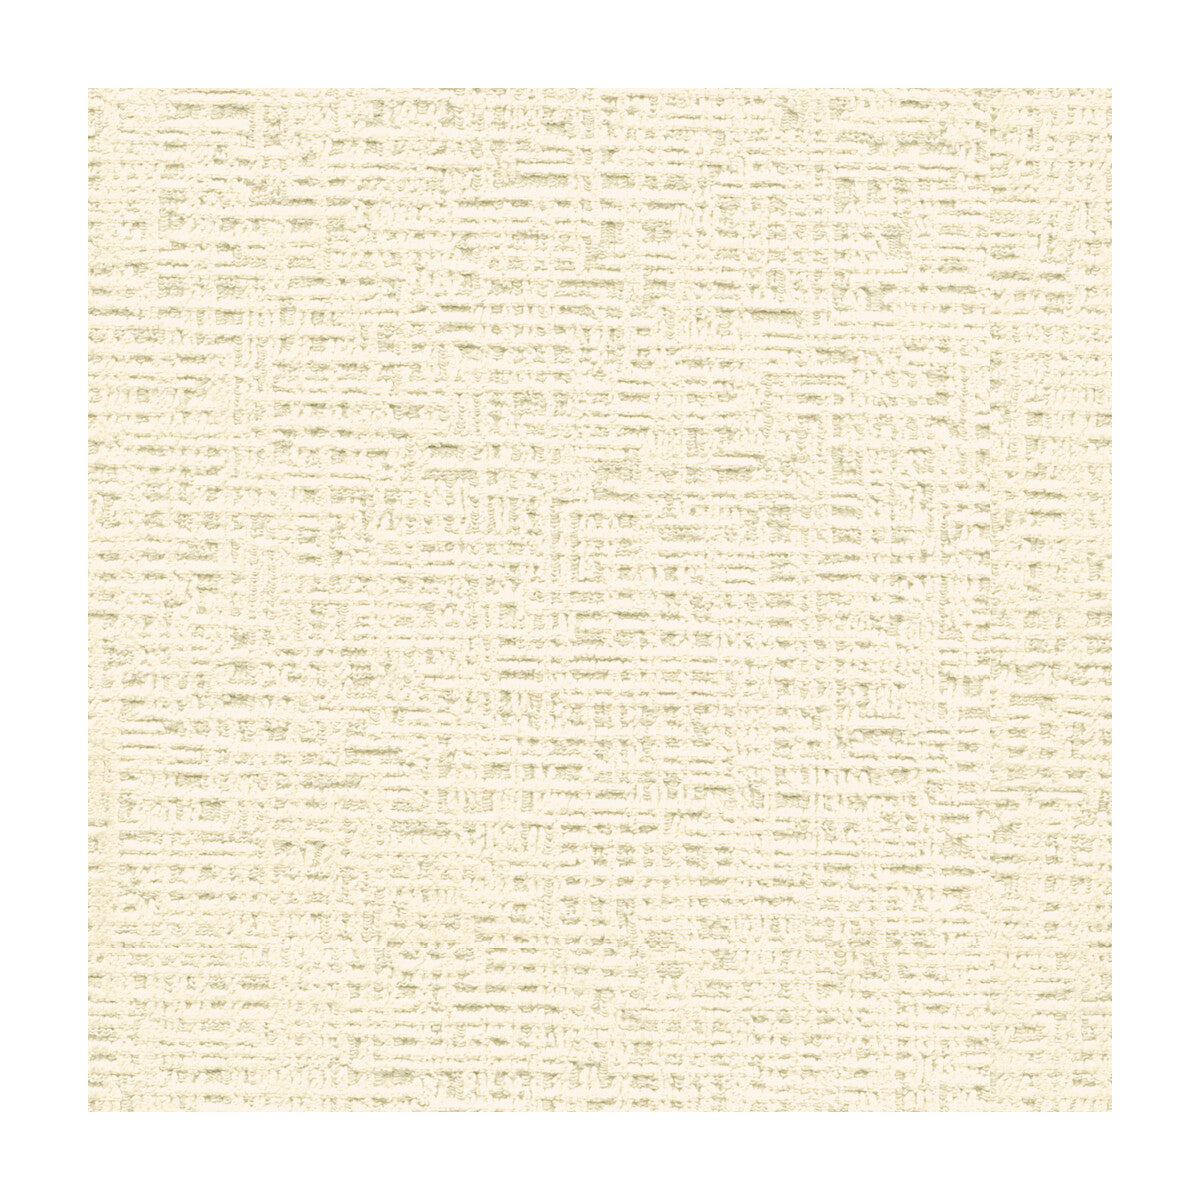 Thatcher fabric in ivory color - pattern 34134.1.0 - by Kravet Design in the Candice Olson collection